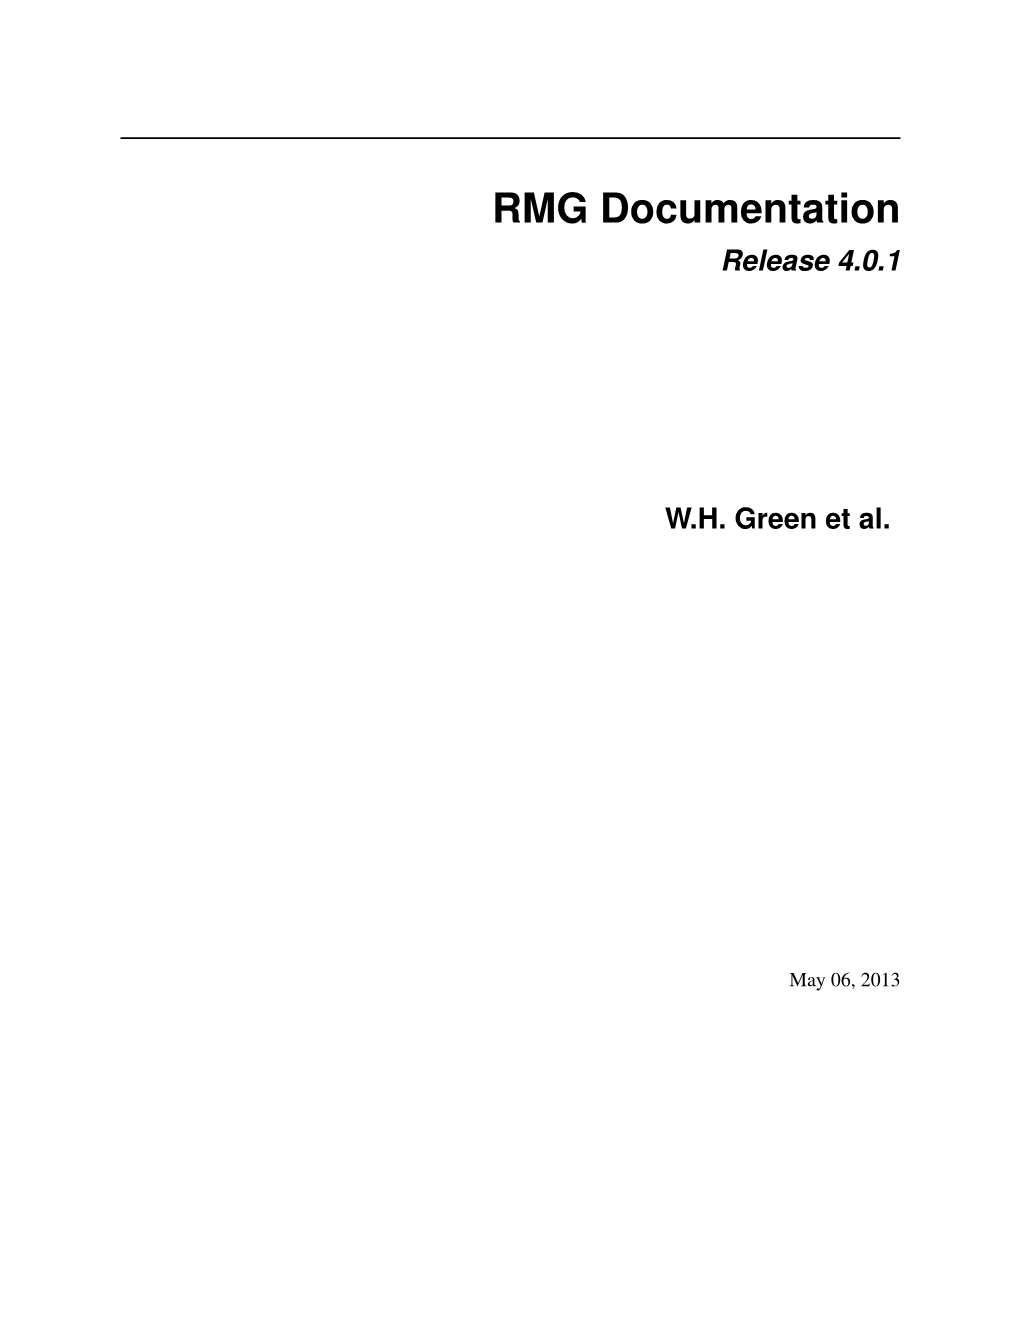 User Manual for RMG 4.0.1 Was Generated on May 06, 2013